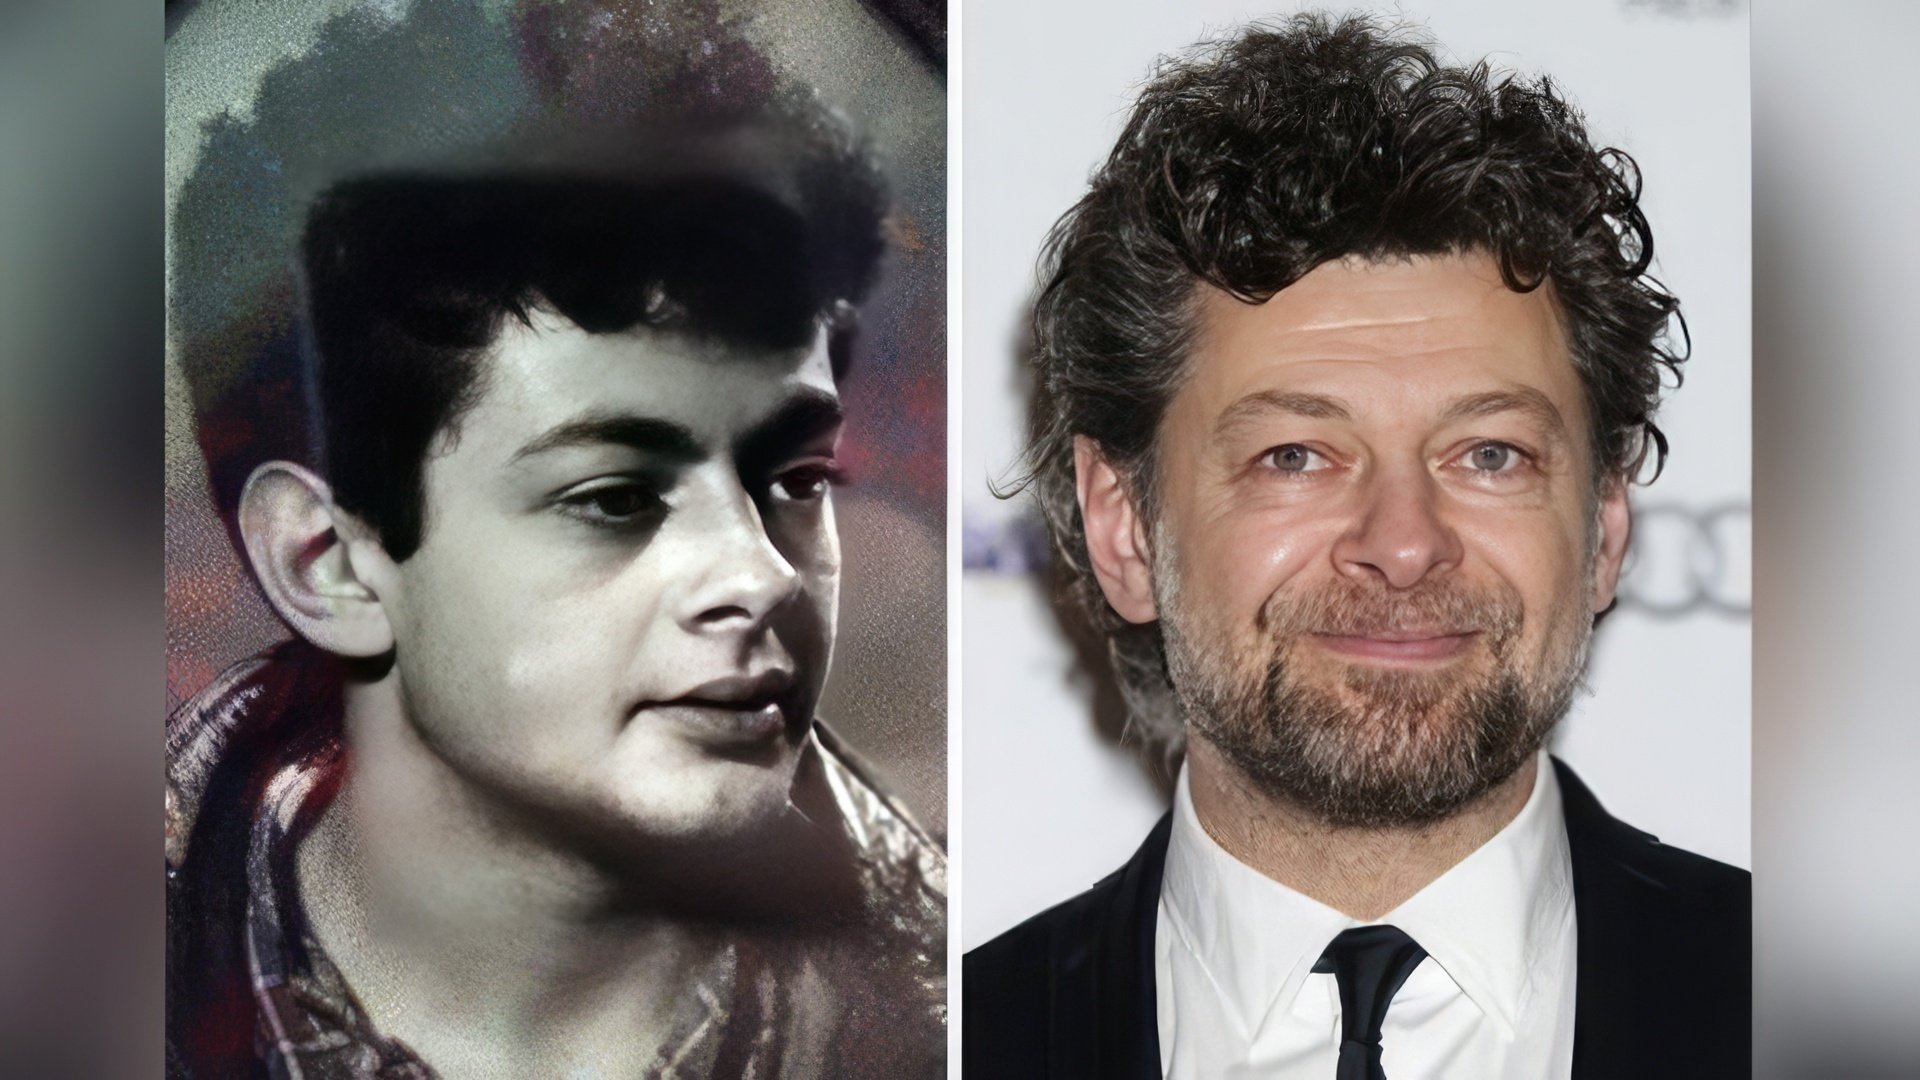 Andy Serkis: young and now